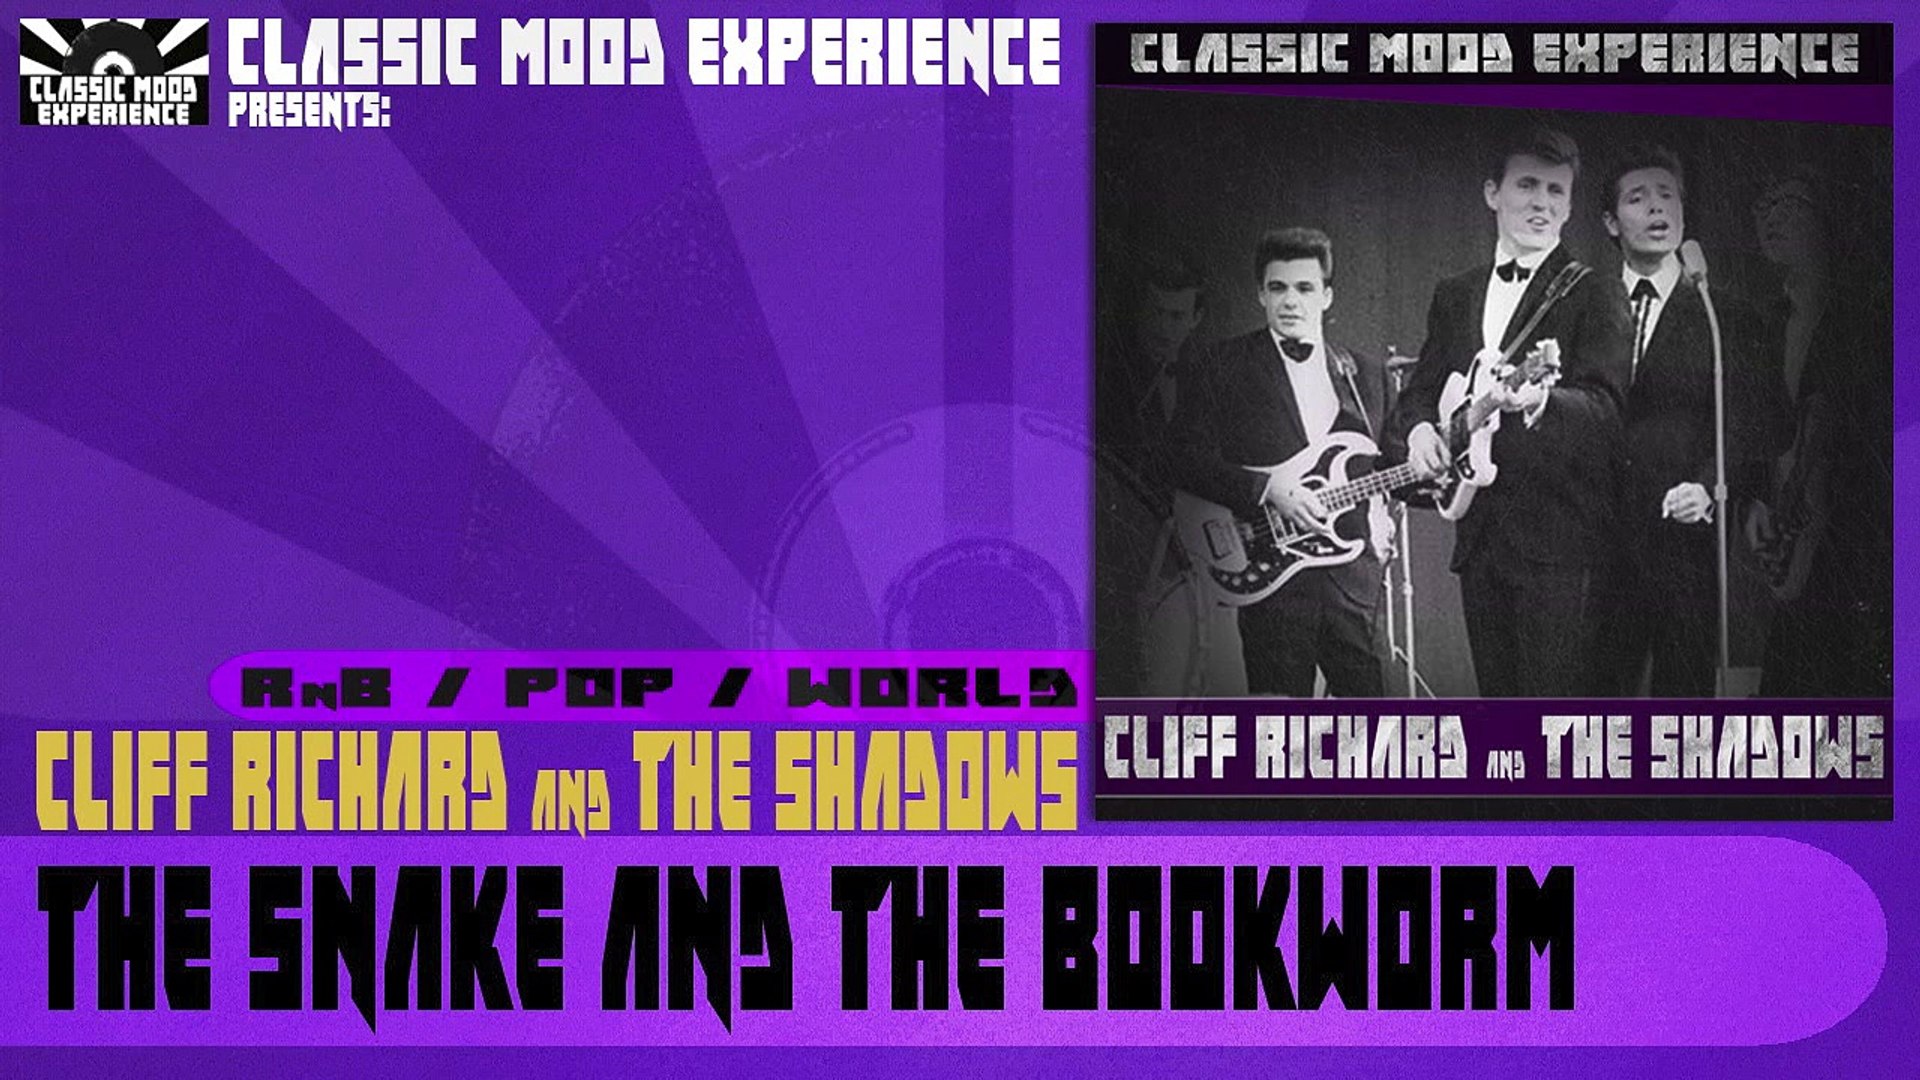 ⁣Cliff Richard & The Shadows - The Snake and the Bookworm (1959)